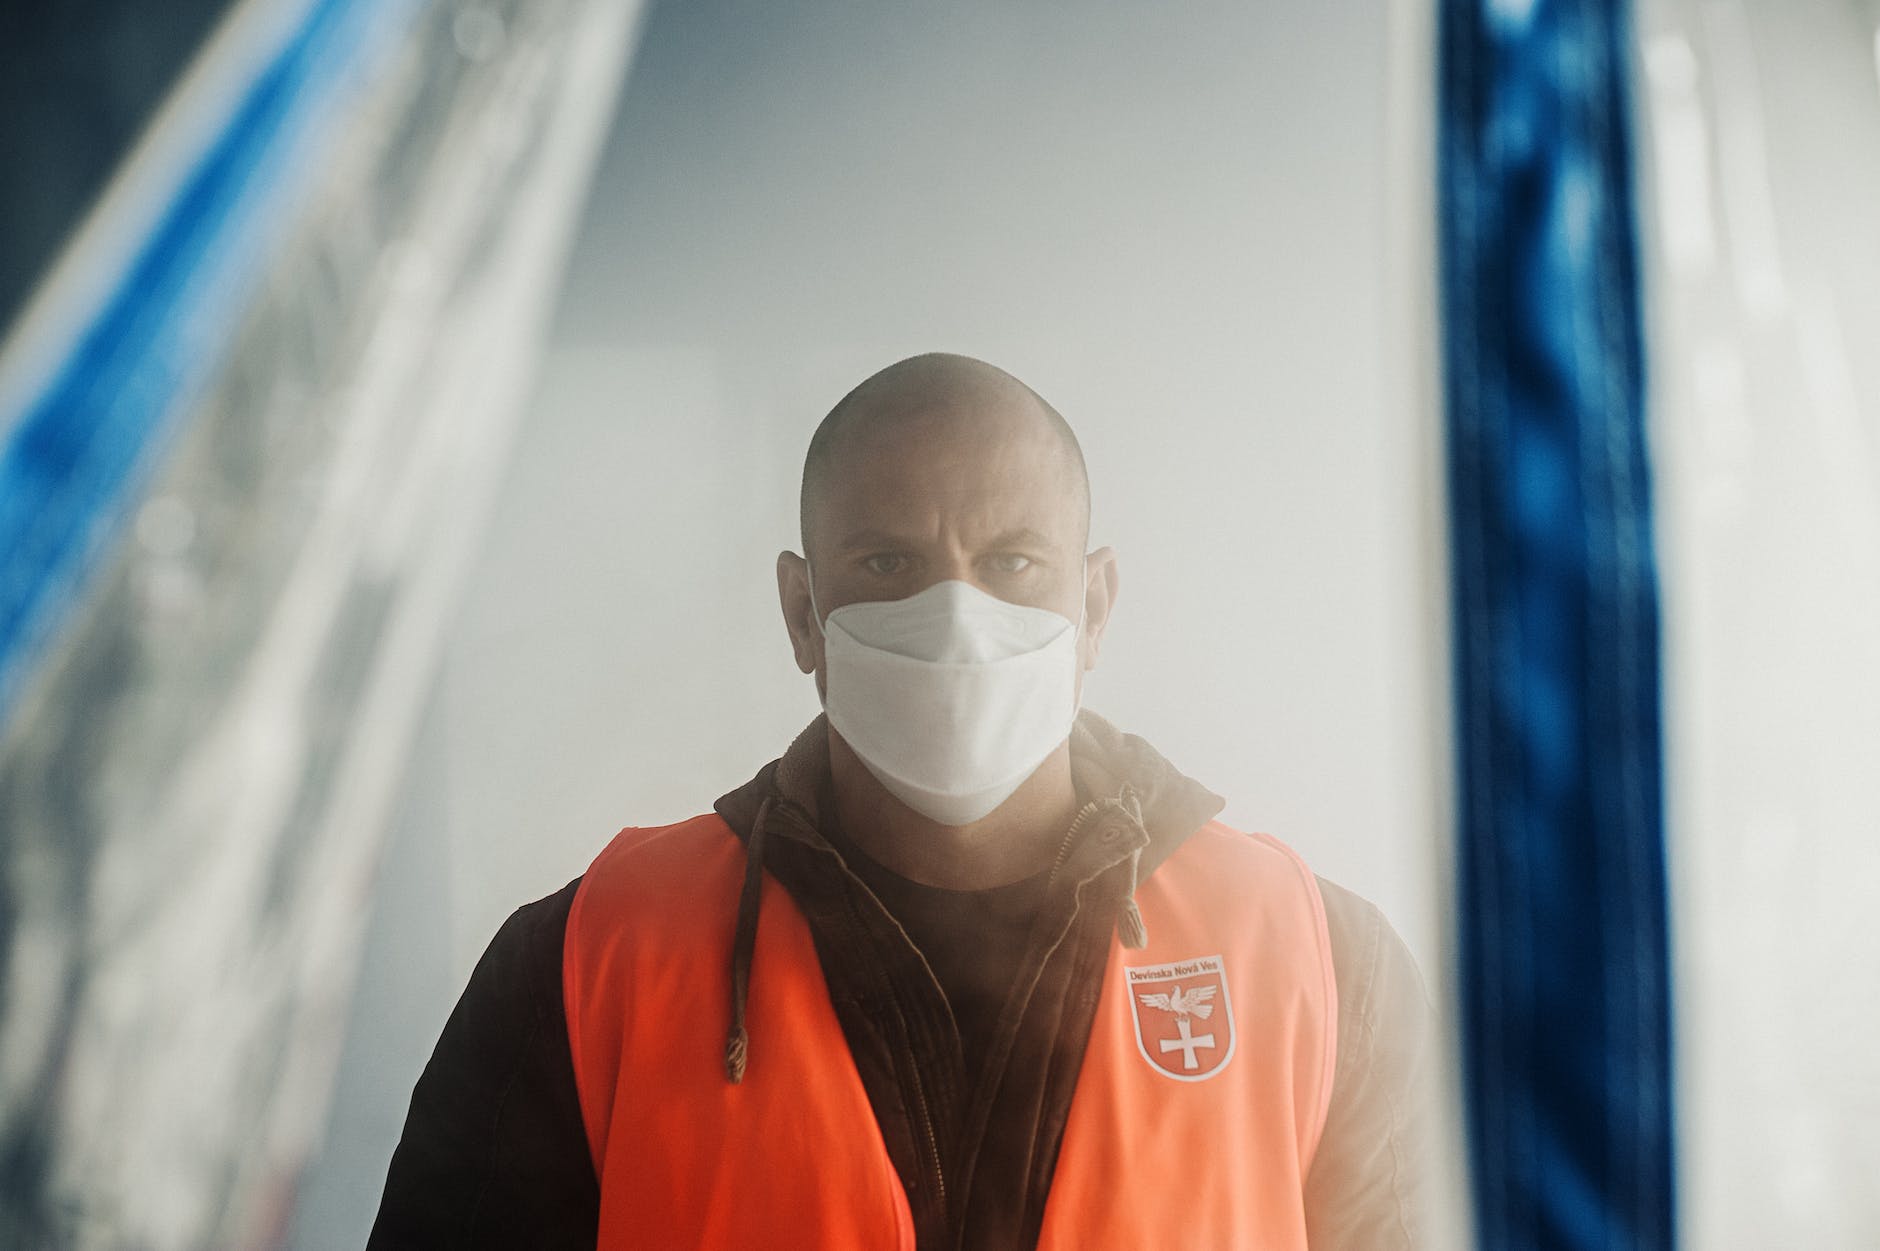 man wearing surgical mask Disinfection 環境消毒